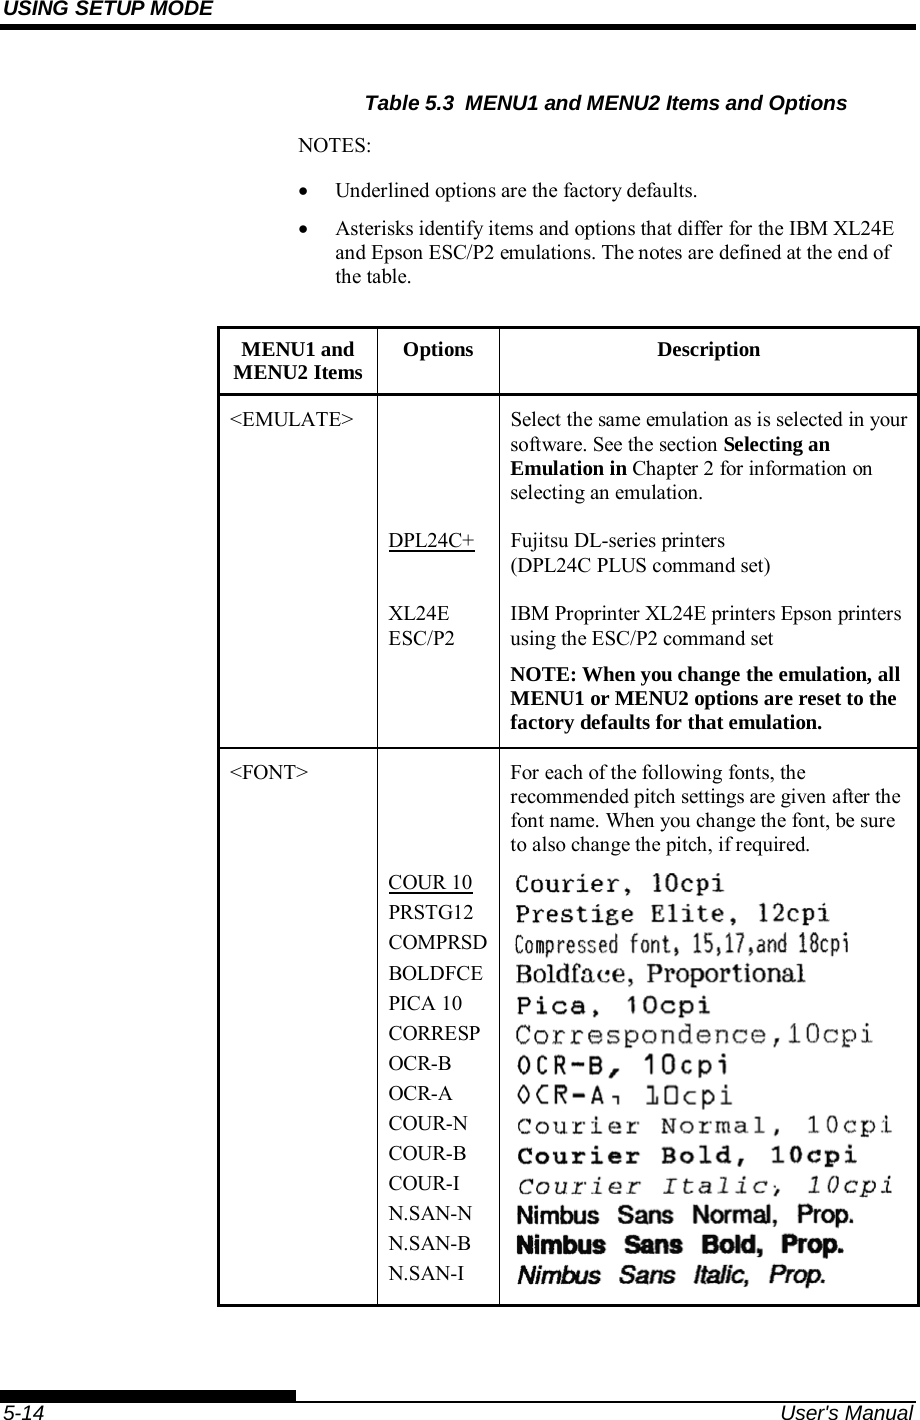 USING SETUP MODE    5-14  User&apos;s Manual Table 5.3  MENU1 and MENU2 Items and Options NOTES:  Underlined options are the factory defaults.  Asterisks identify items and options that differ for the IBM XL24E and Epson ESC/P2 emulations. The notes are defined at the end of the table.  MENU1 and MENU2 Items  Options Description &lt;EMULATE&gt;    Select the same emulation as is selected in your software. See the section Selecting an Emulation in Chapter 2 for information on selecting an emulation.  DPL24C+ Fujitsu DL-series printers  (DPL24C PLUS command set)  XL24E ESC/P2 IBM Proprinter XL24E printers Epson printers using the ESC/P2 command set NOTE: When you change the emulation, all MENU1 or MENU2 options are reset to the factory defaults for that emulation. &lt;FONT&gt;    COUR 10 PRSTG12 COMPRSDBOLDFCEPICA 10 CORRESPOCR-B OCR-A COUR-N COUR-B COUR-I N.SAN-N N.SAN-B N.SAN-I For each of the following fonts, the recommended pitch settings are given after the font name. When you change the font, be sure to also change the pitch, if required.  